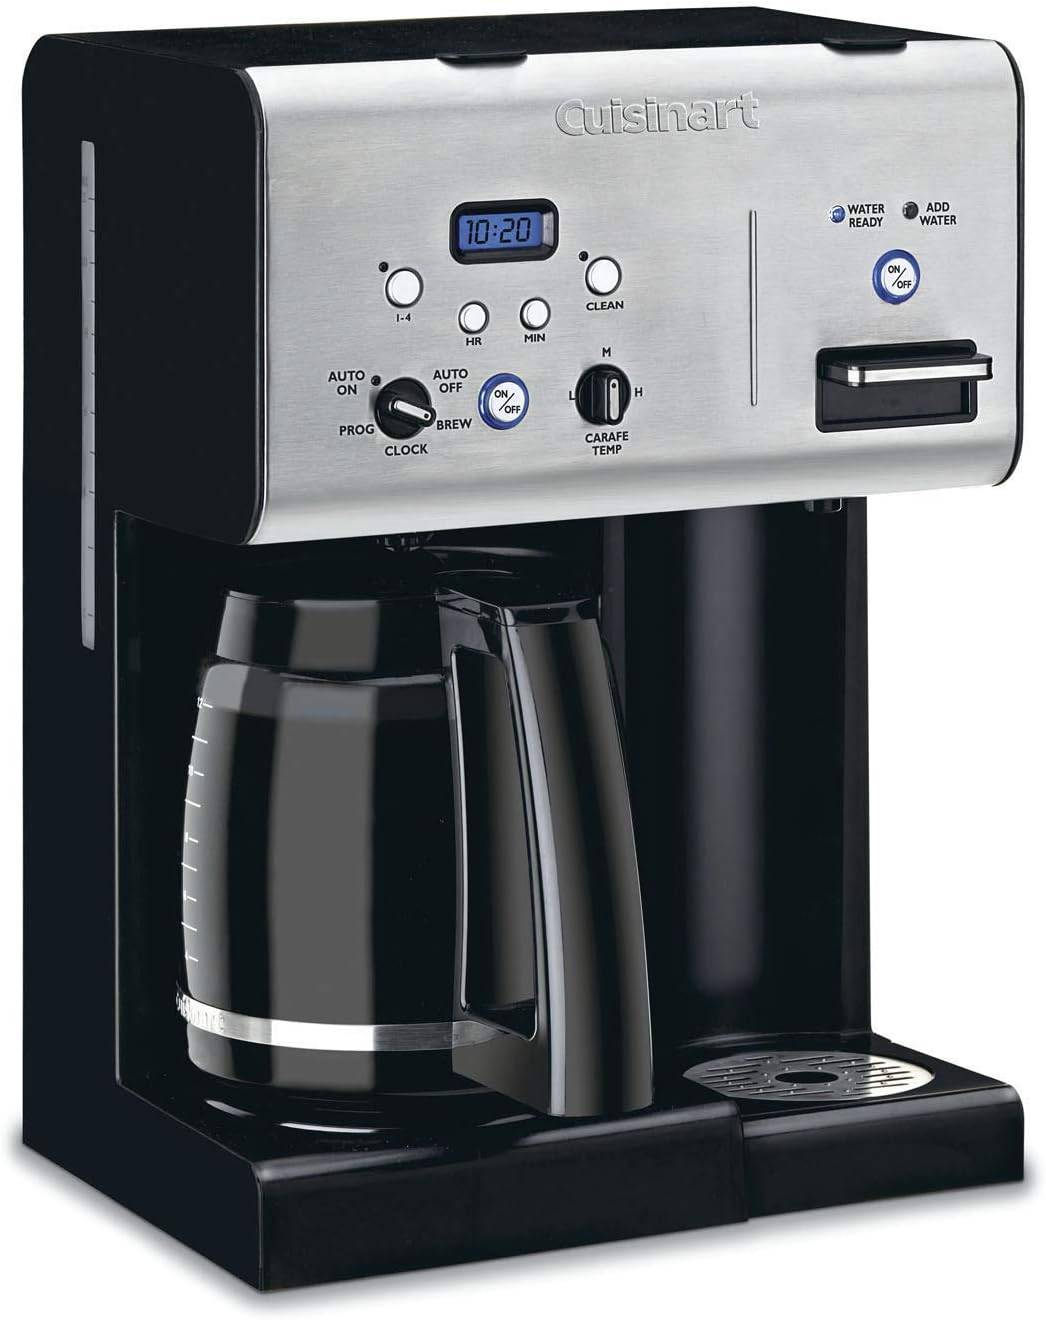 Mr. Coffee 12-Cup Auto-Pause Programmable Coffee Maker, Turquoise | JWX36-AM